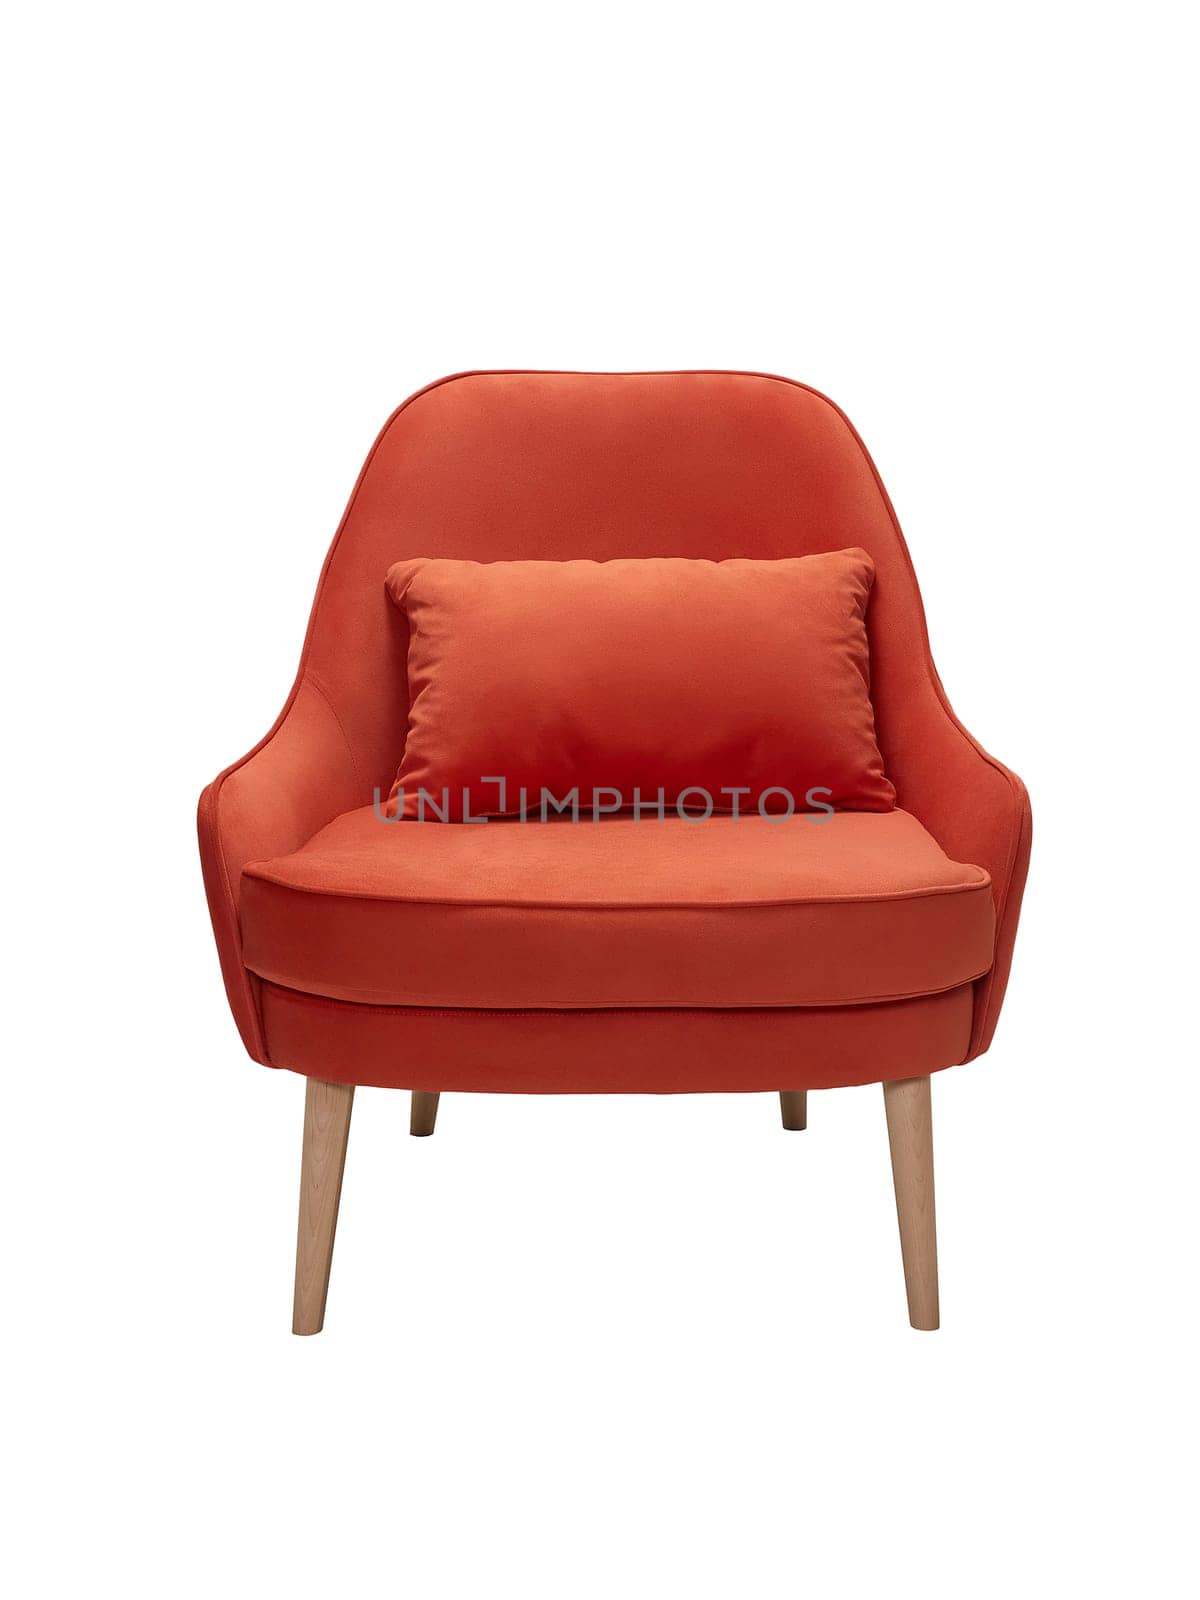 modern red fabric armchair with wooden legs isolated on white background, front view by artemzatsepilin